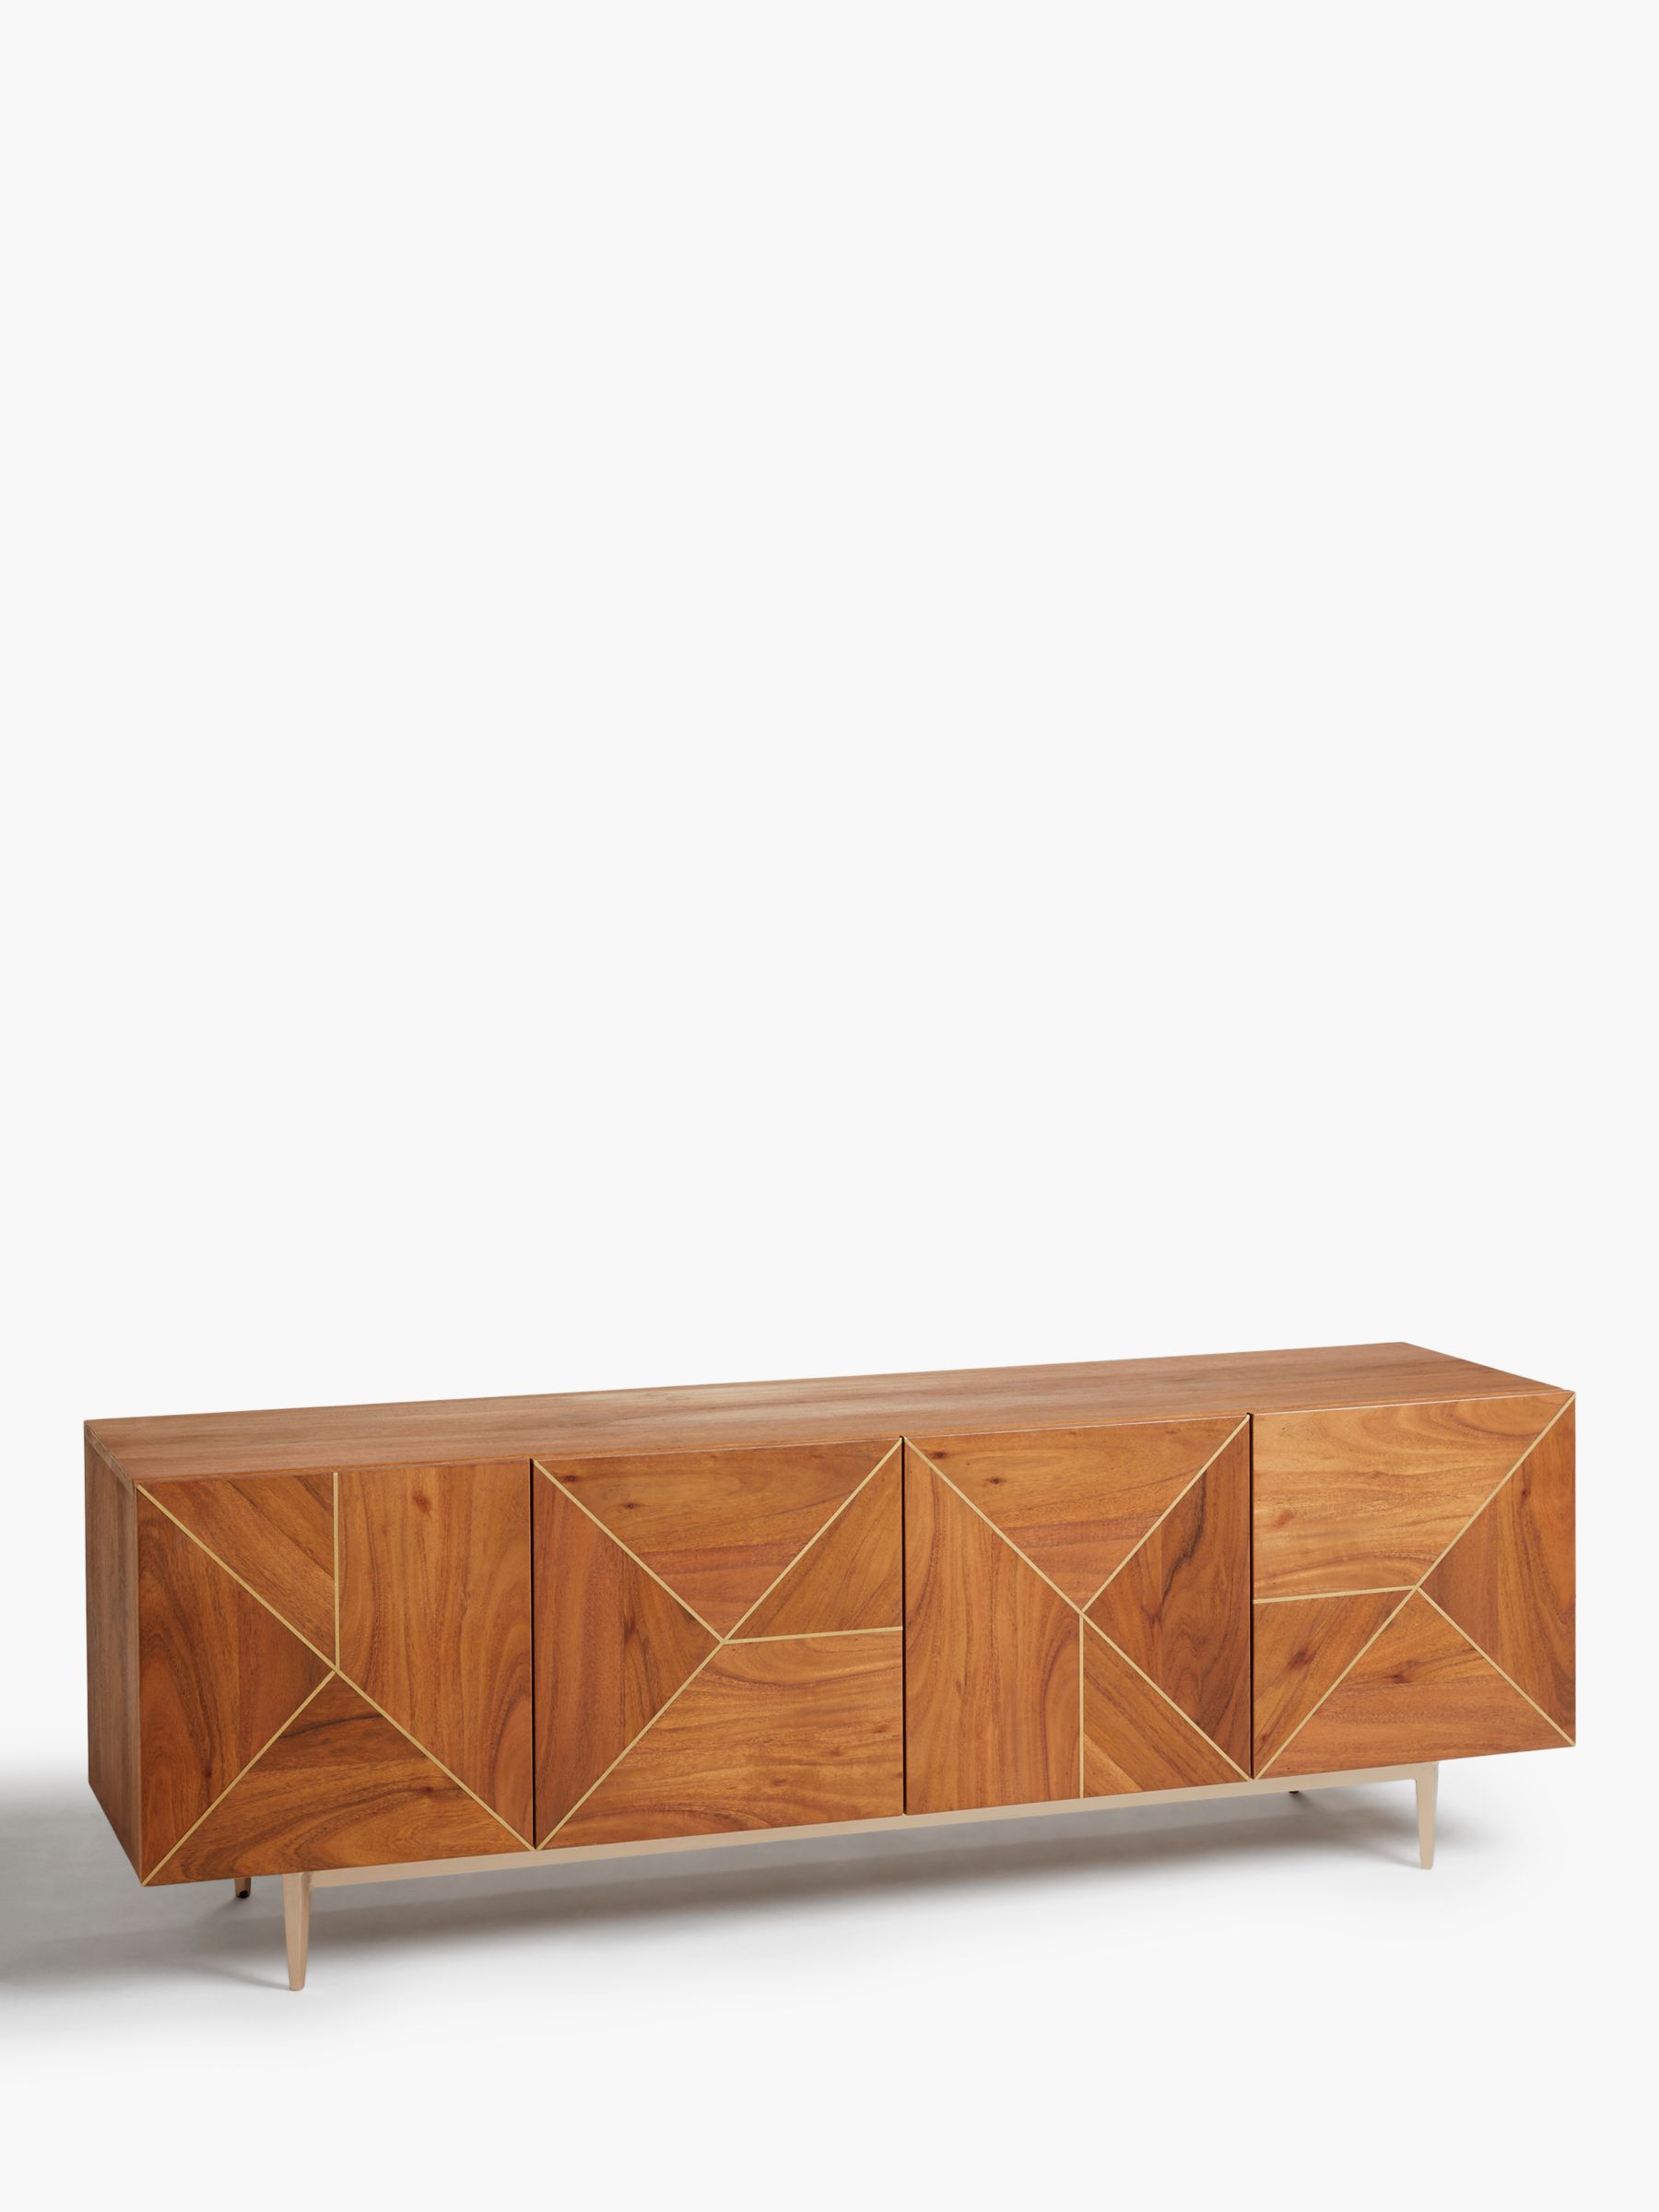 Photo of John lewis + swoon mendel tv stand sideboard for tvs up to 65